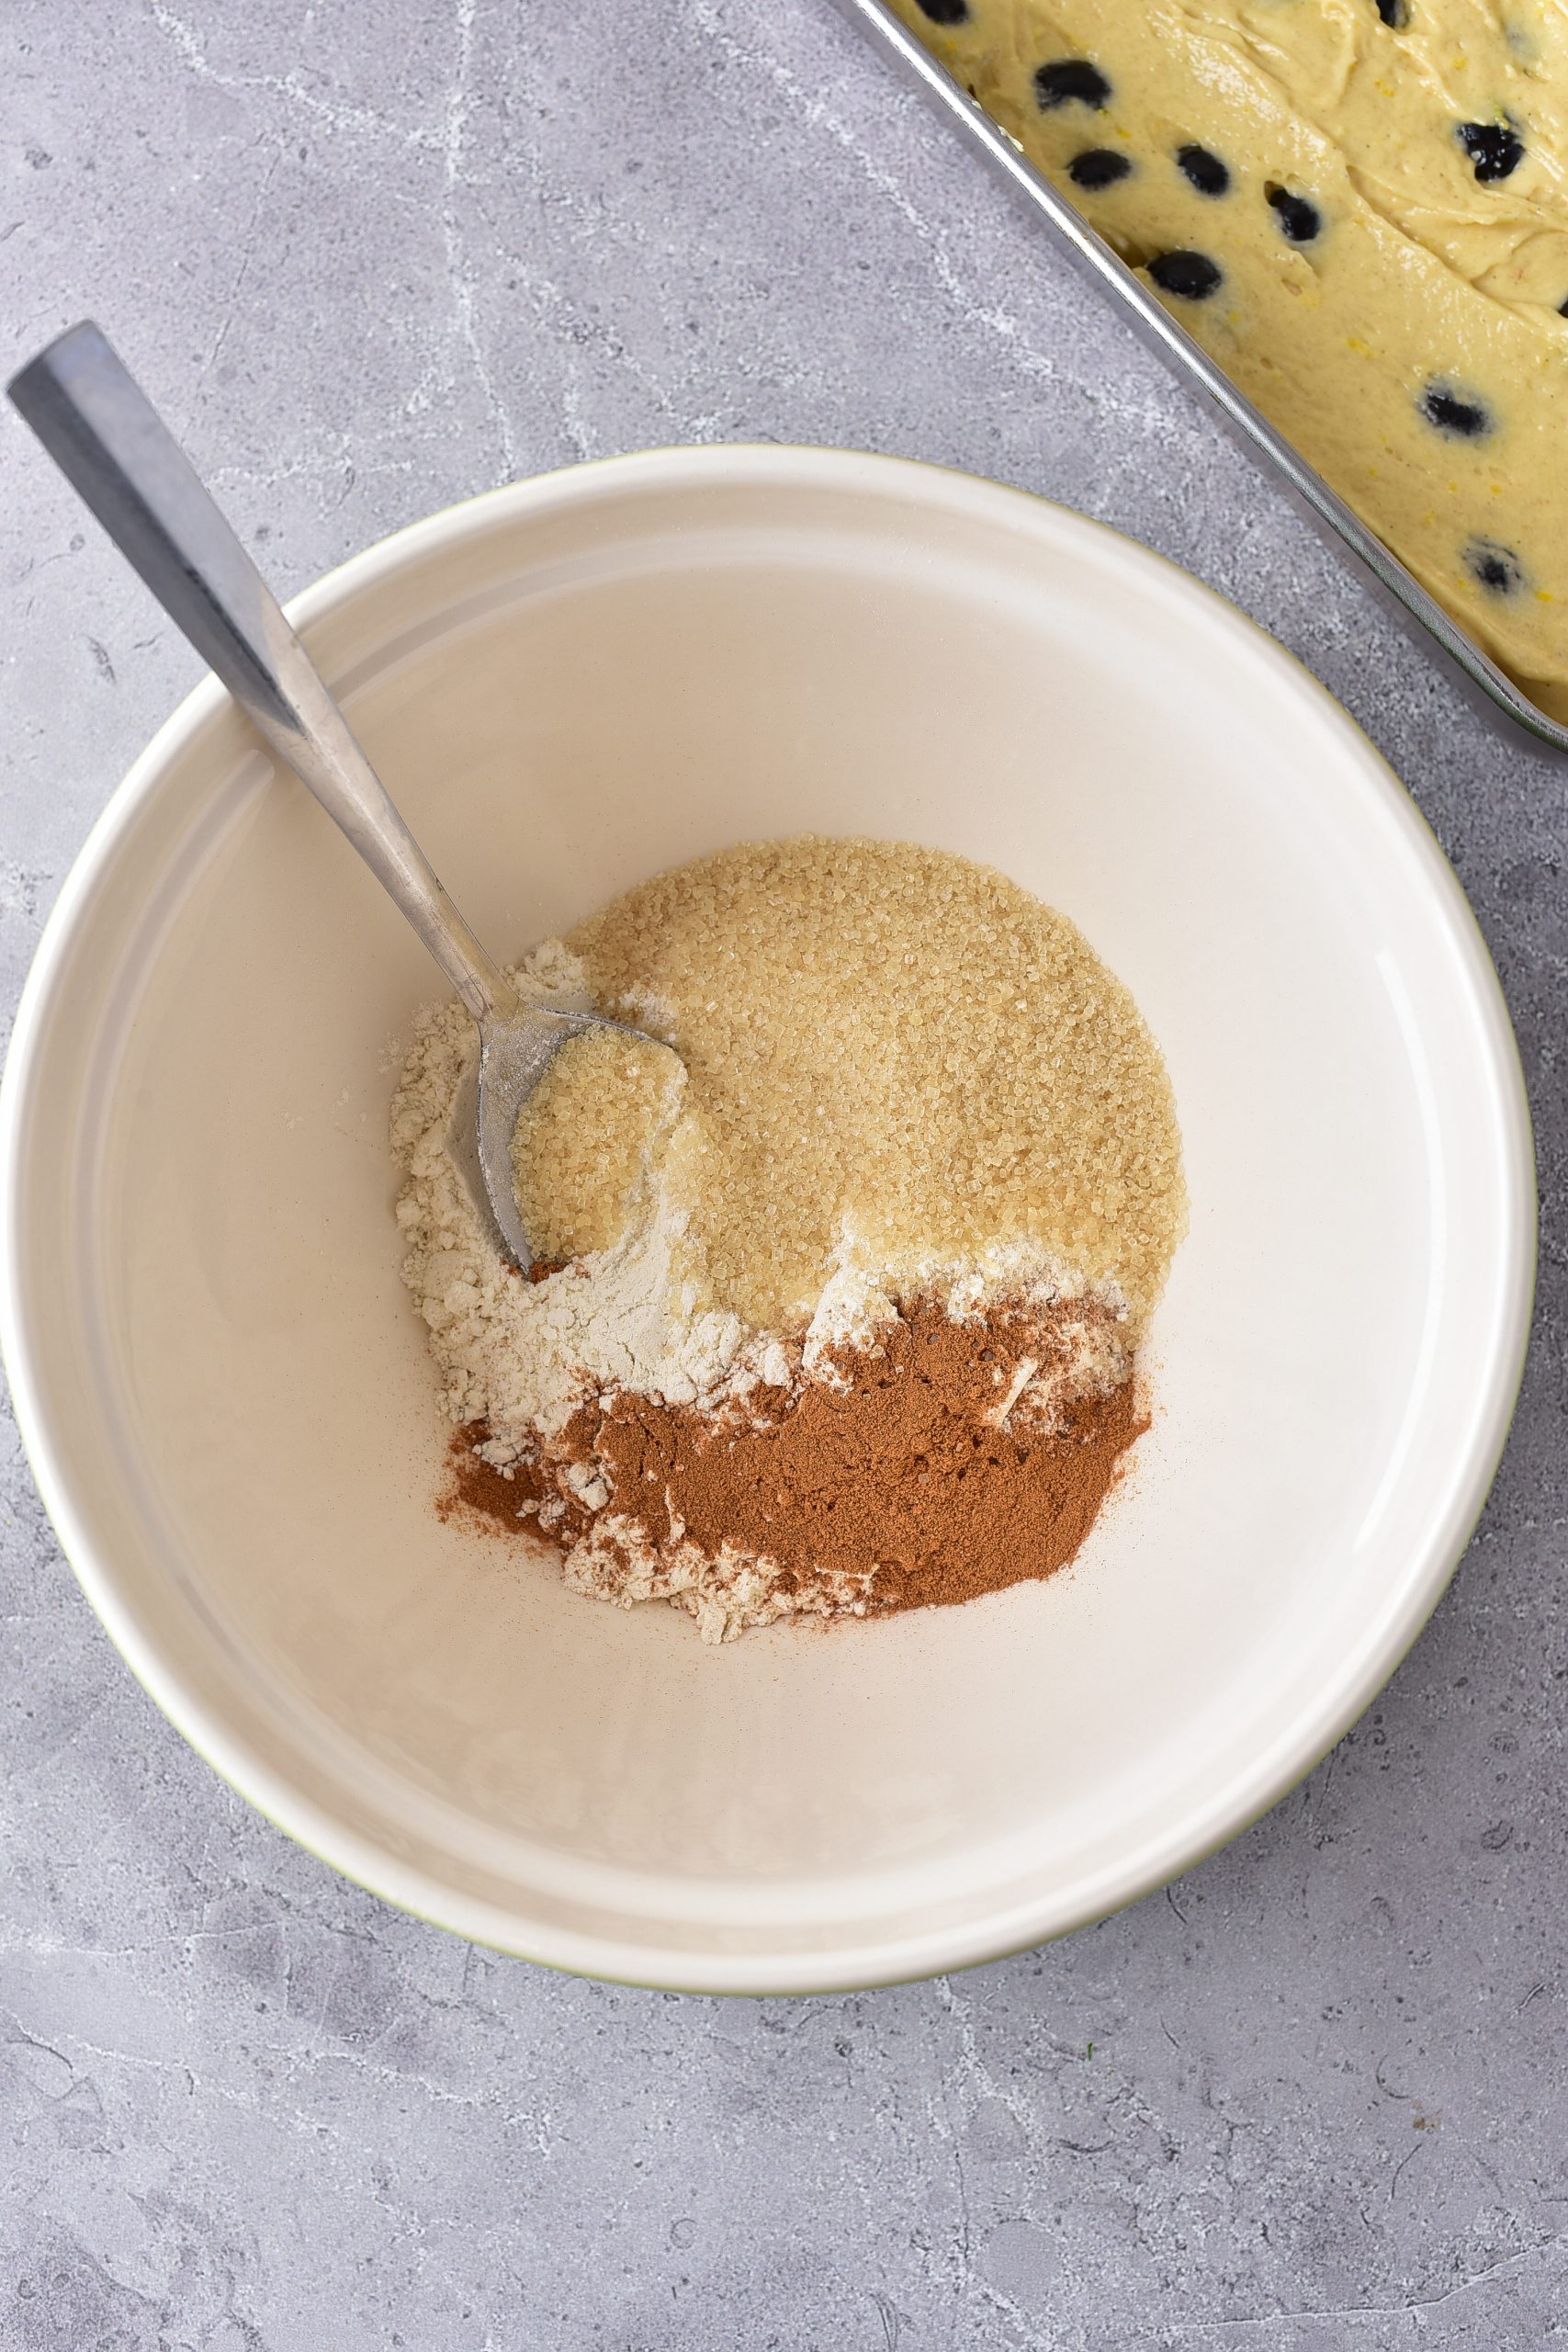 In a separate bowl, mix the ingredients for the streusel until they form a crumbly mixture. 